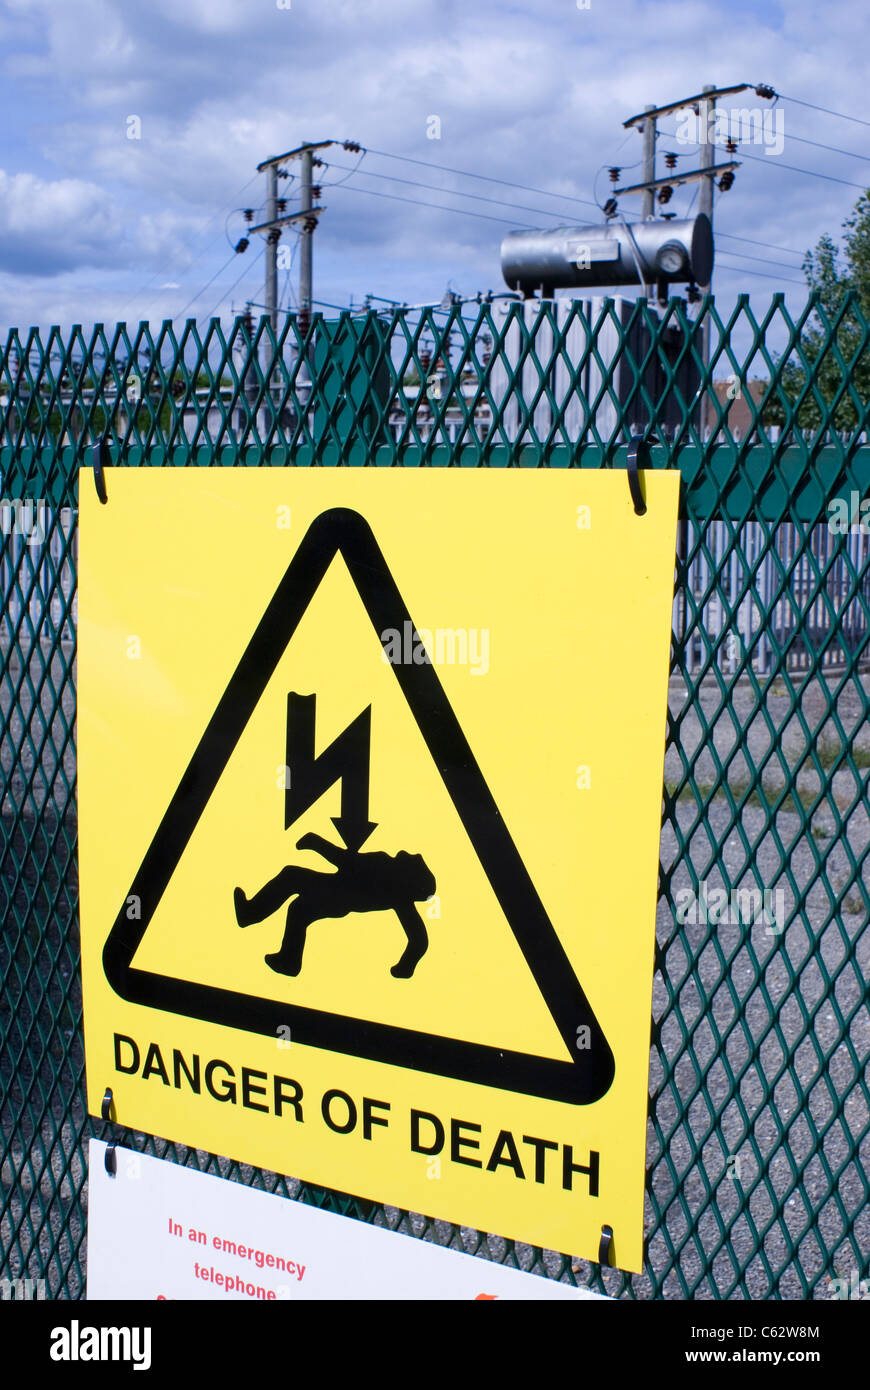 Danger of Death sign at electricity substation Stock Photo